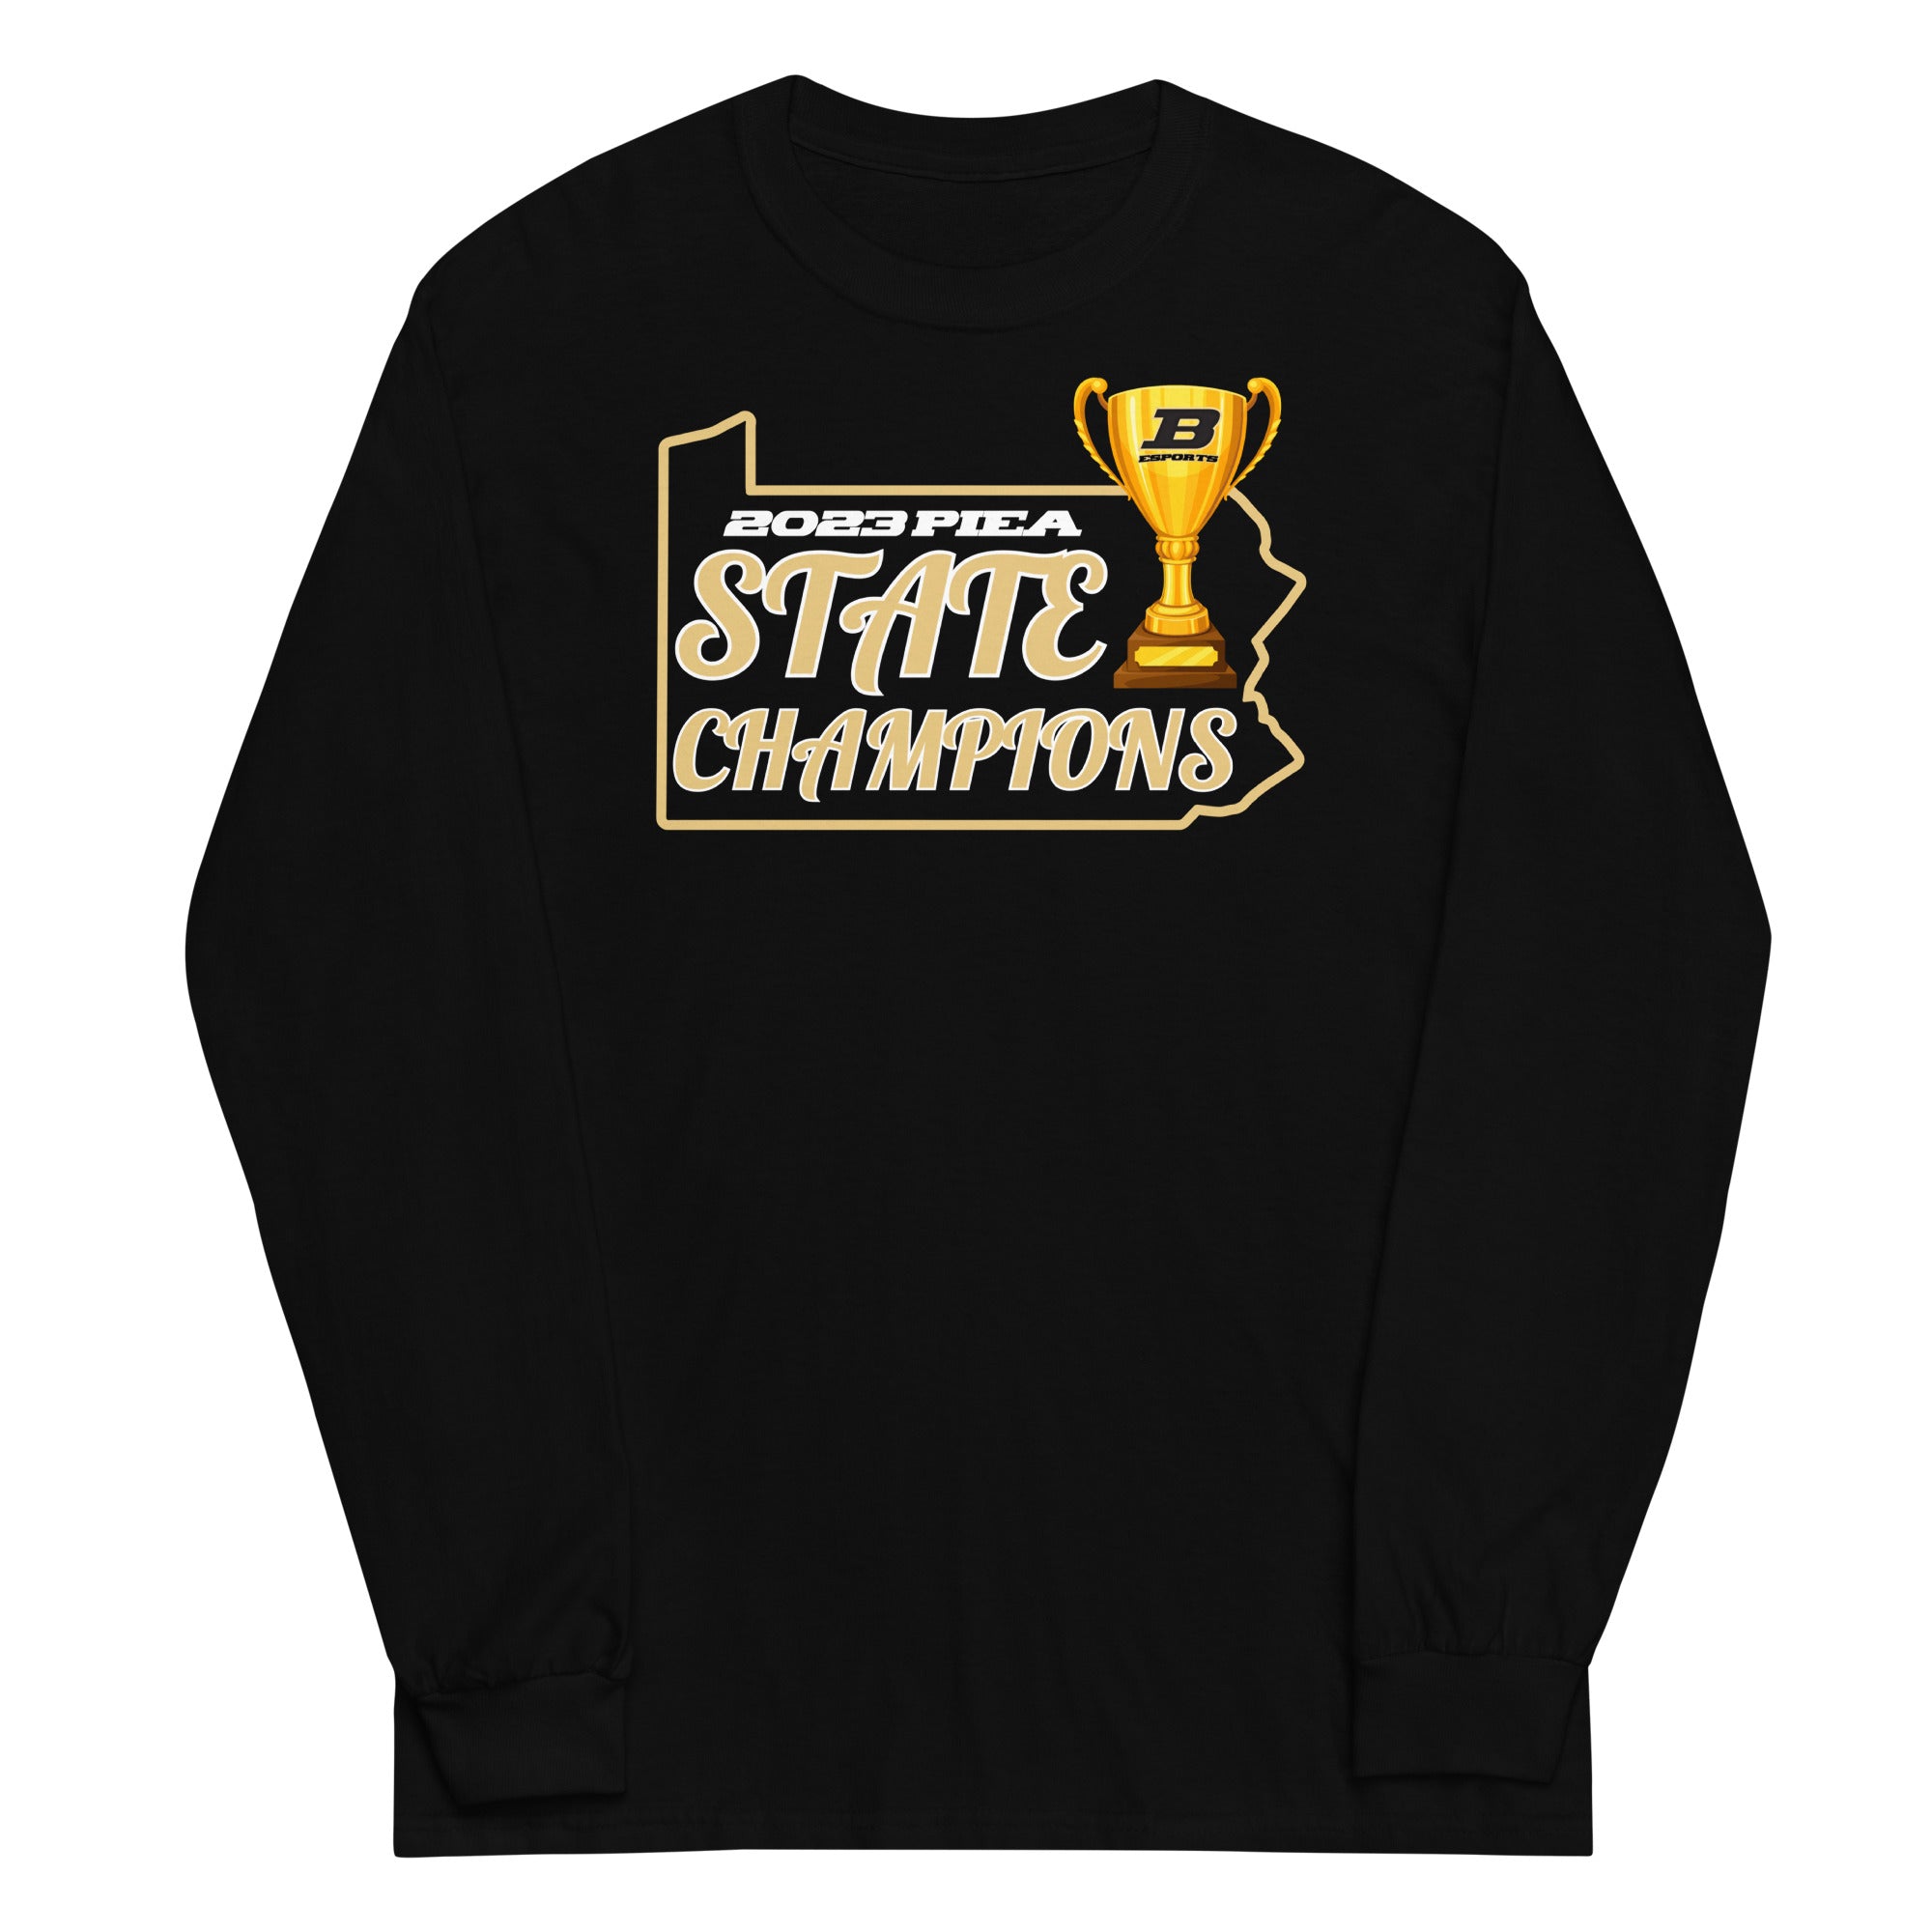 Official 2023 PIEA State Champion Long Sleeve